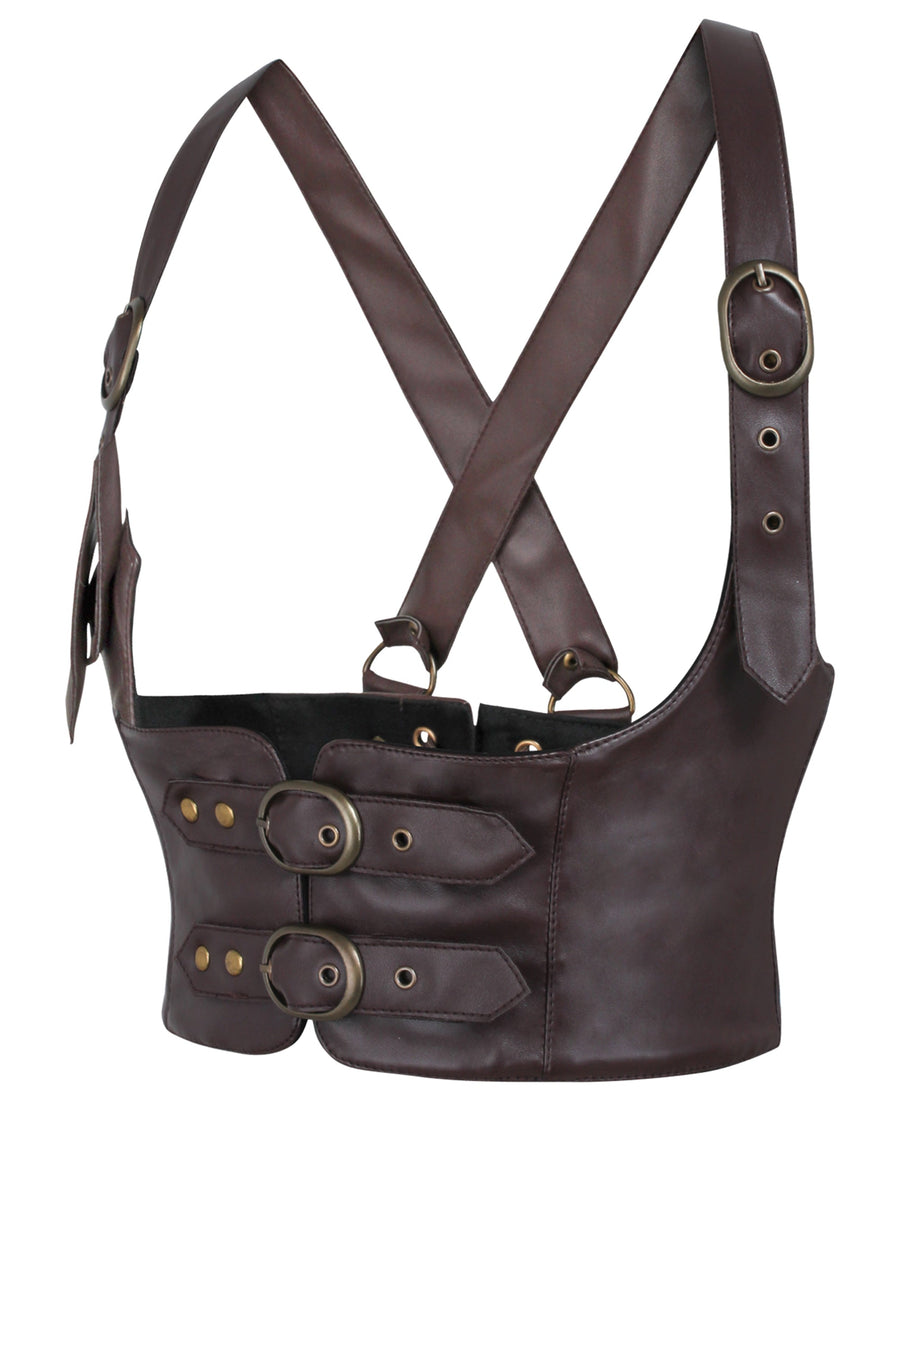  Women Underbust Leather Corset Custom Made Plus size harness  (S, Brown) : Handmade Products